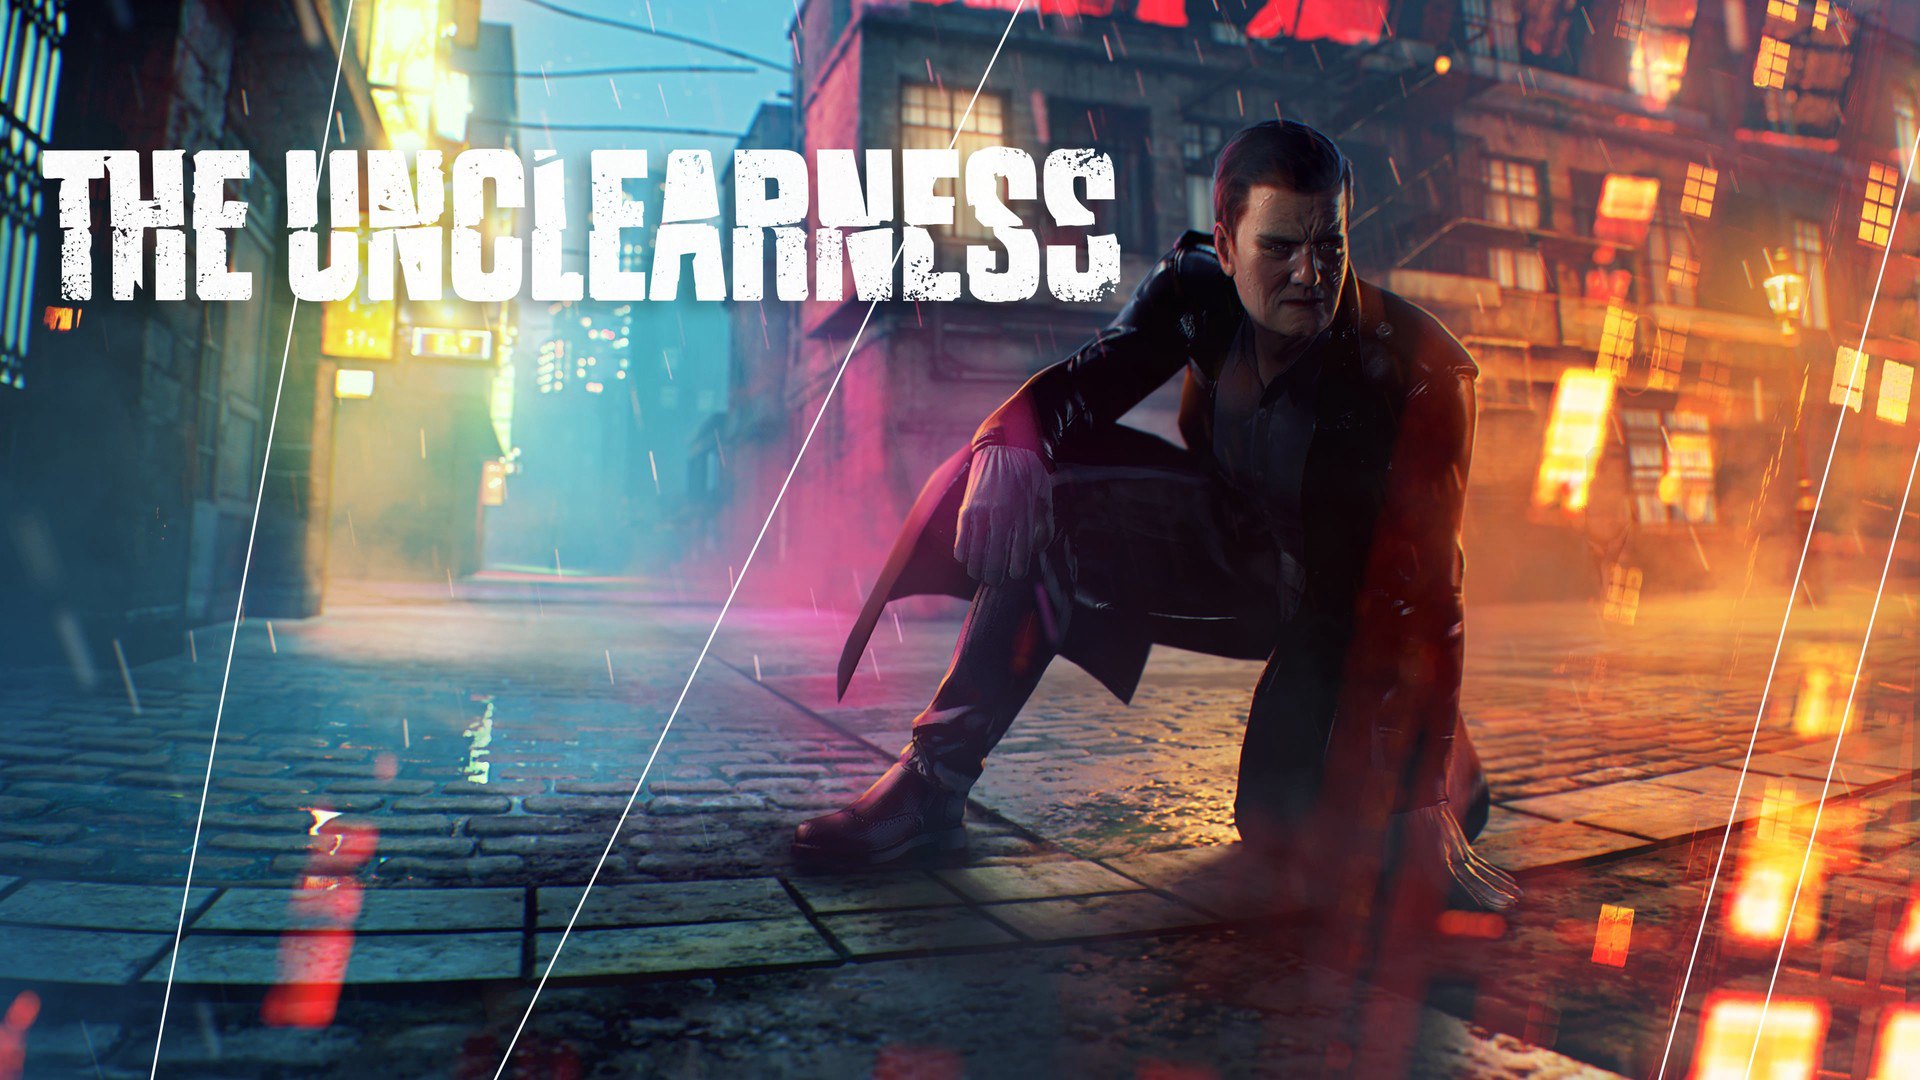 THE UNCLEARNESS Steam CD Key, 6.77$